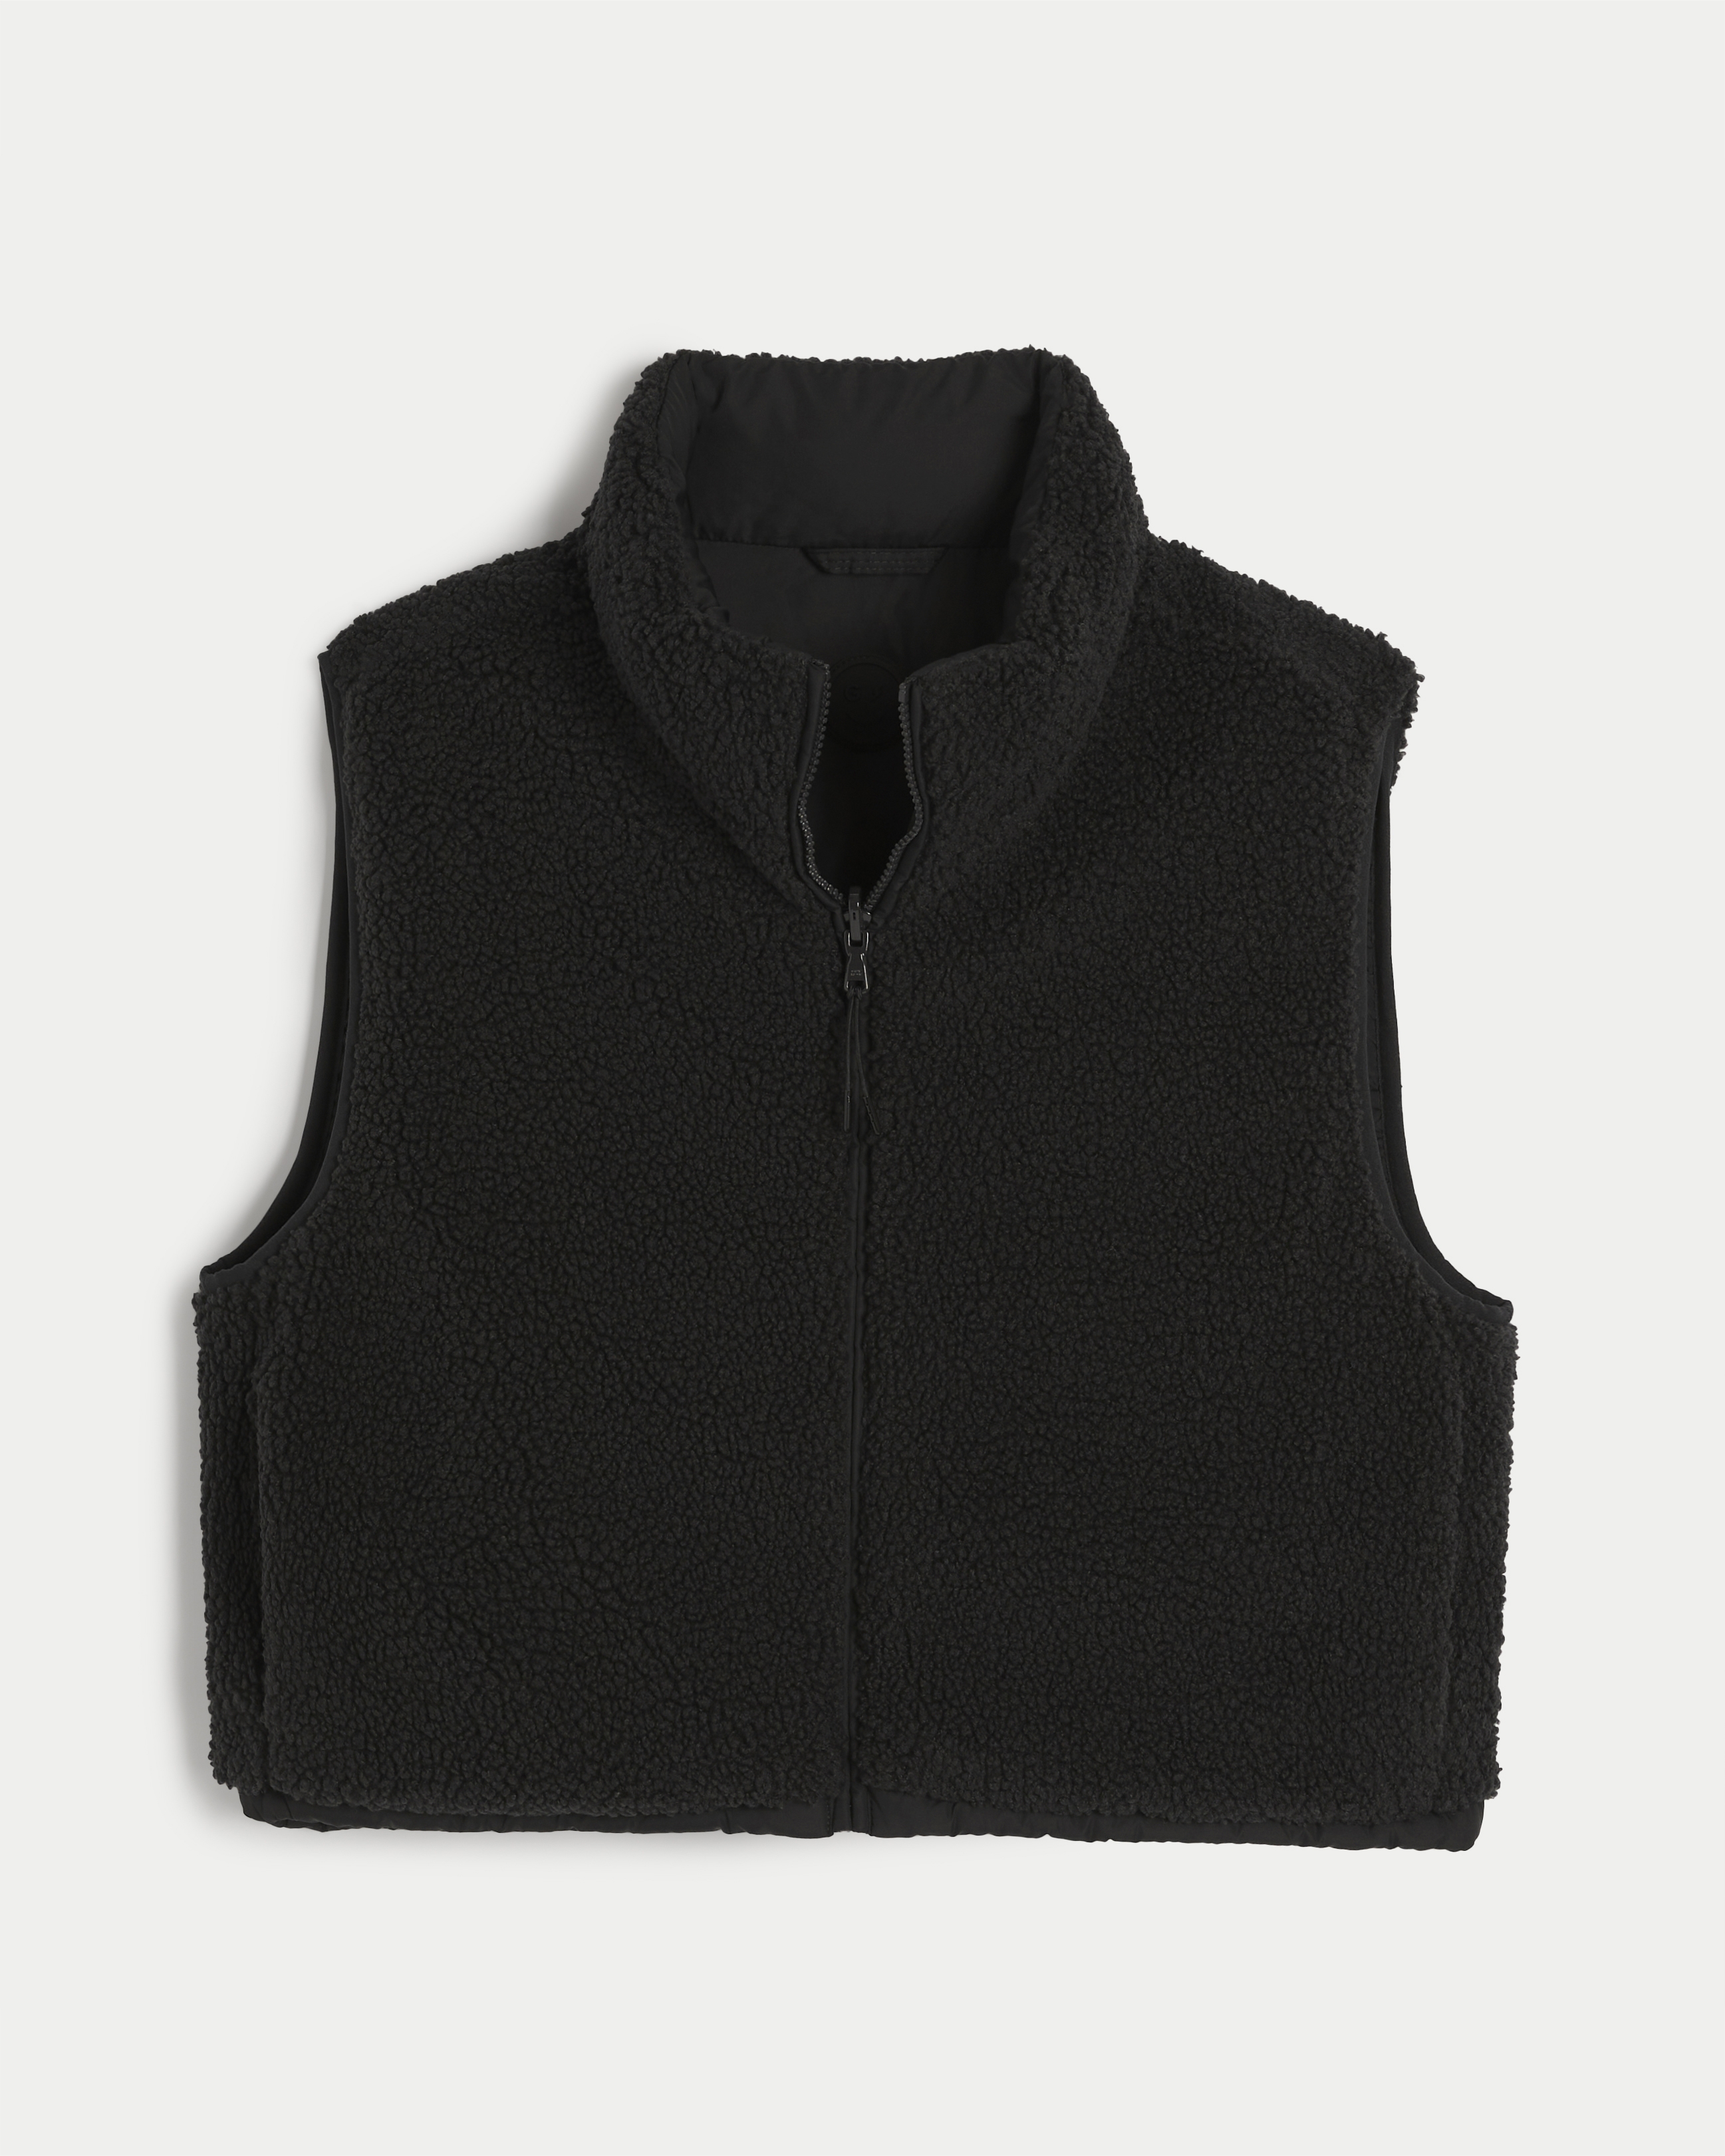 Women's Gilly Hicks Sherpa-Lined Reversible Vest, Women's Clearance